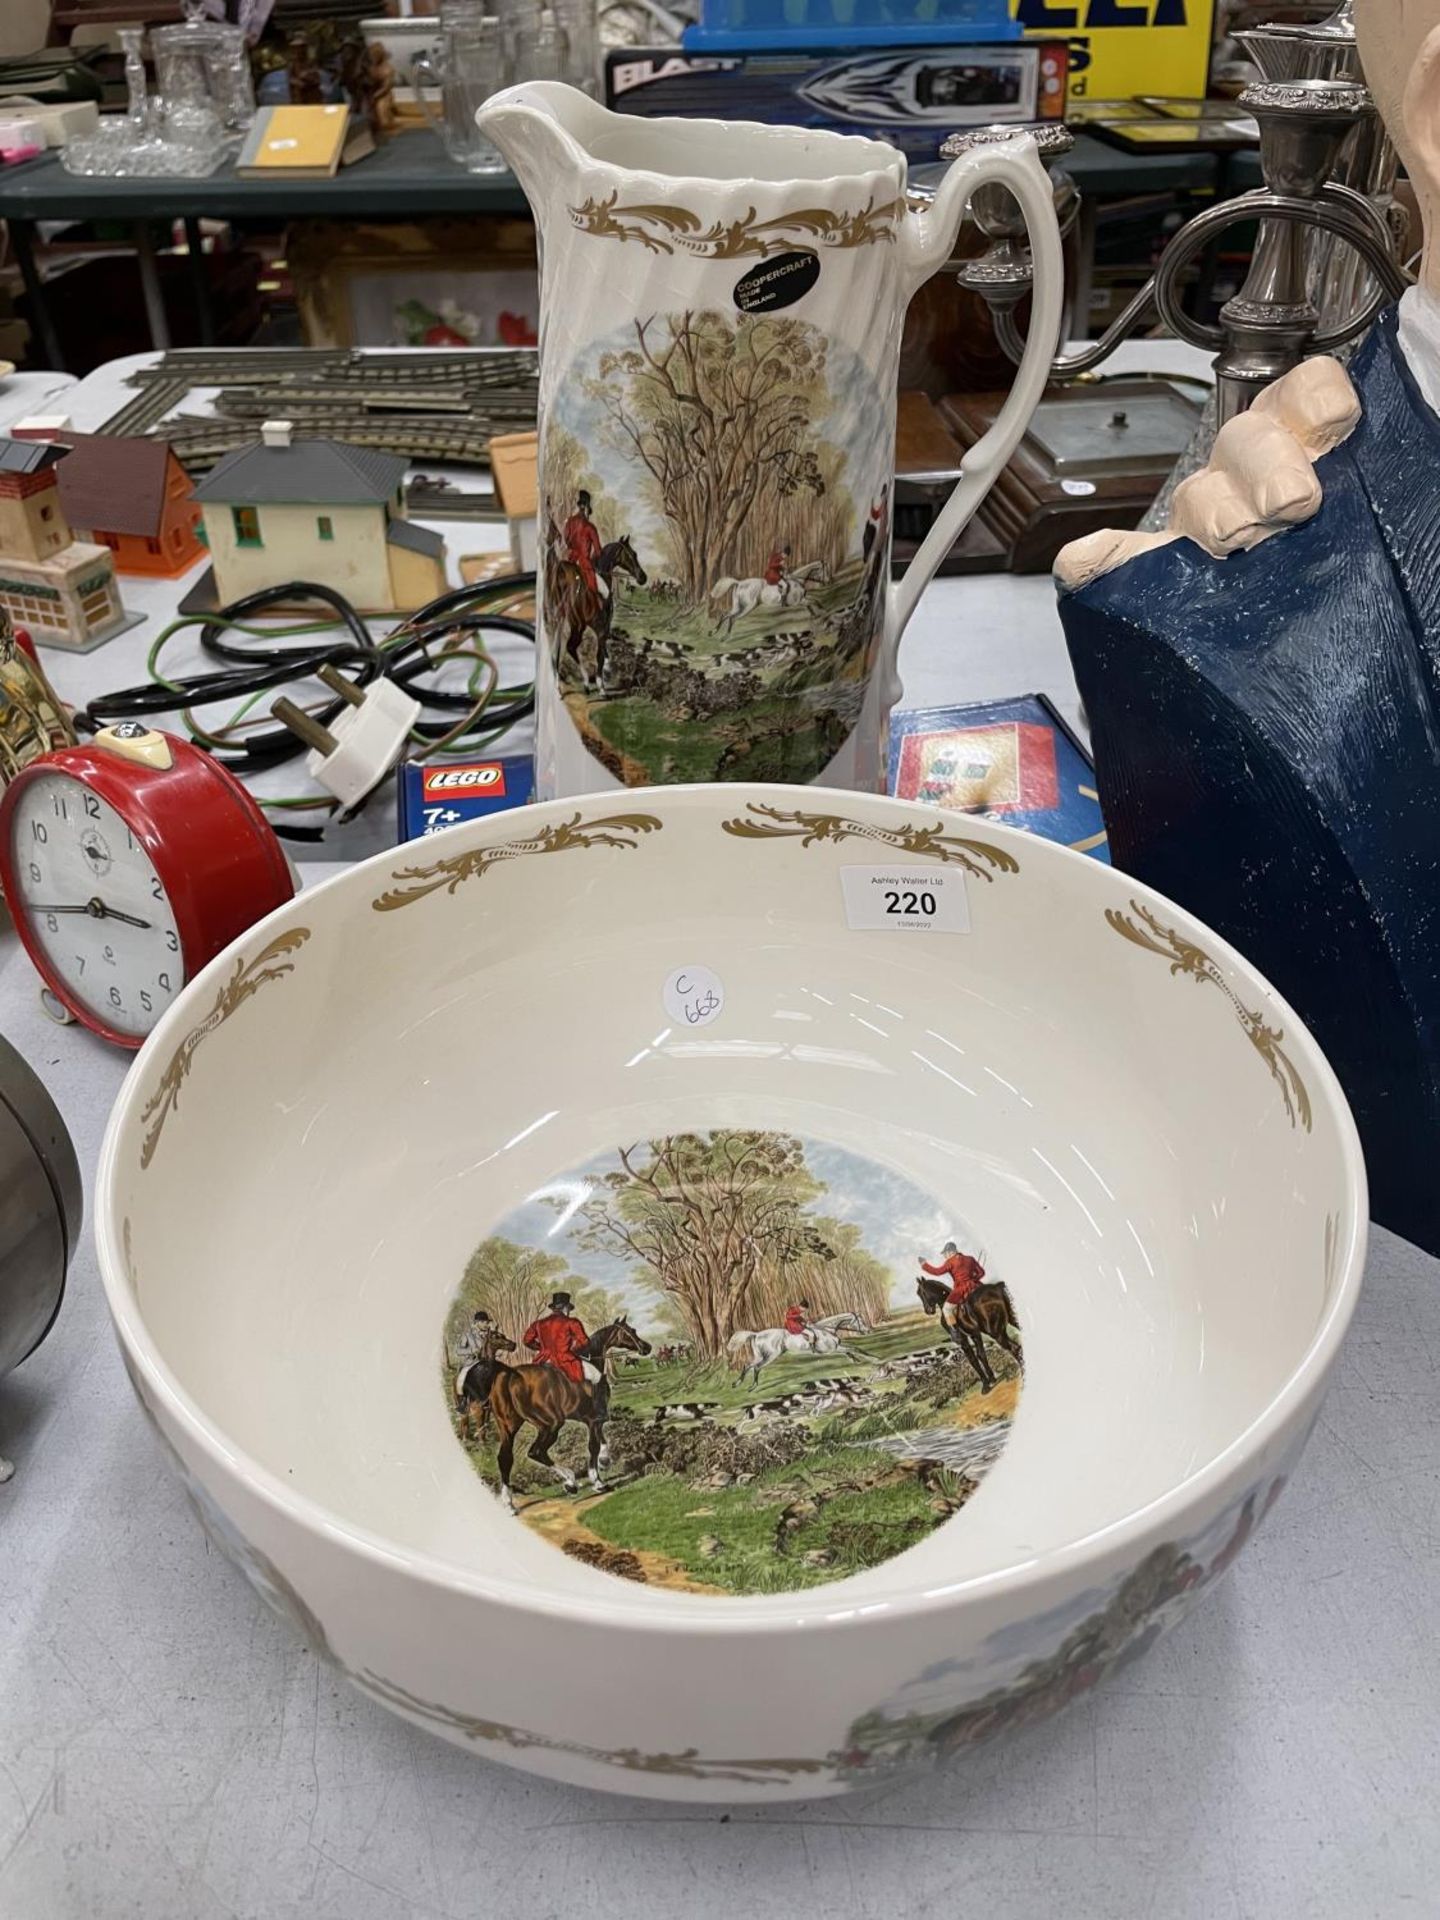 A LARGE COOPERCRAFT JUG AND BOWL WITH HUNTING SCENES